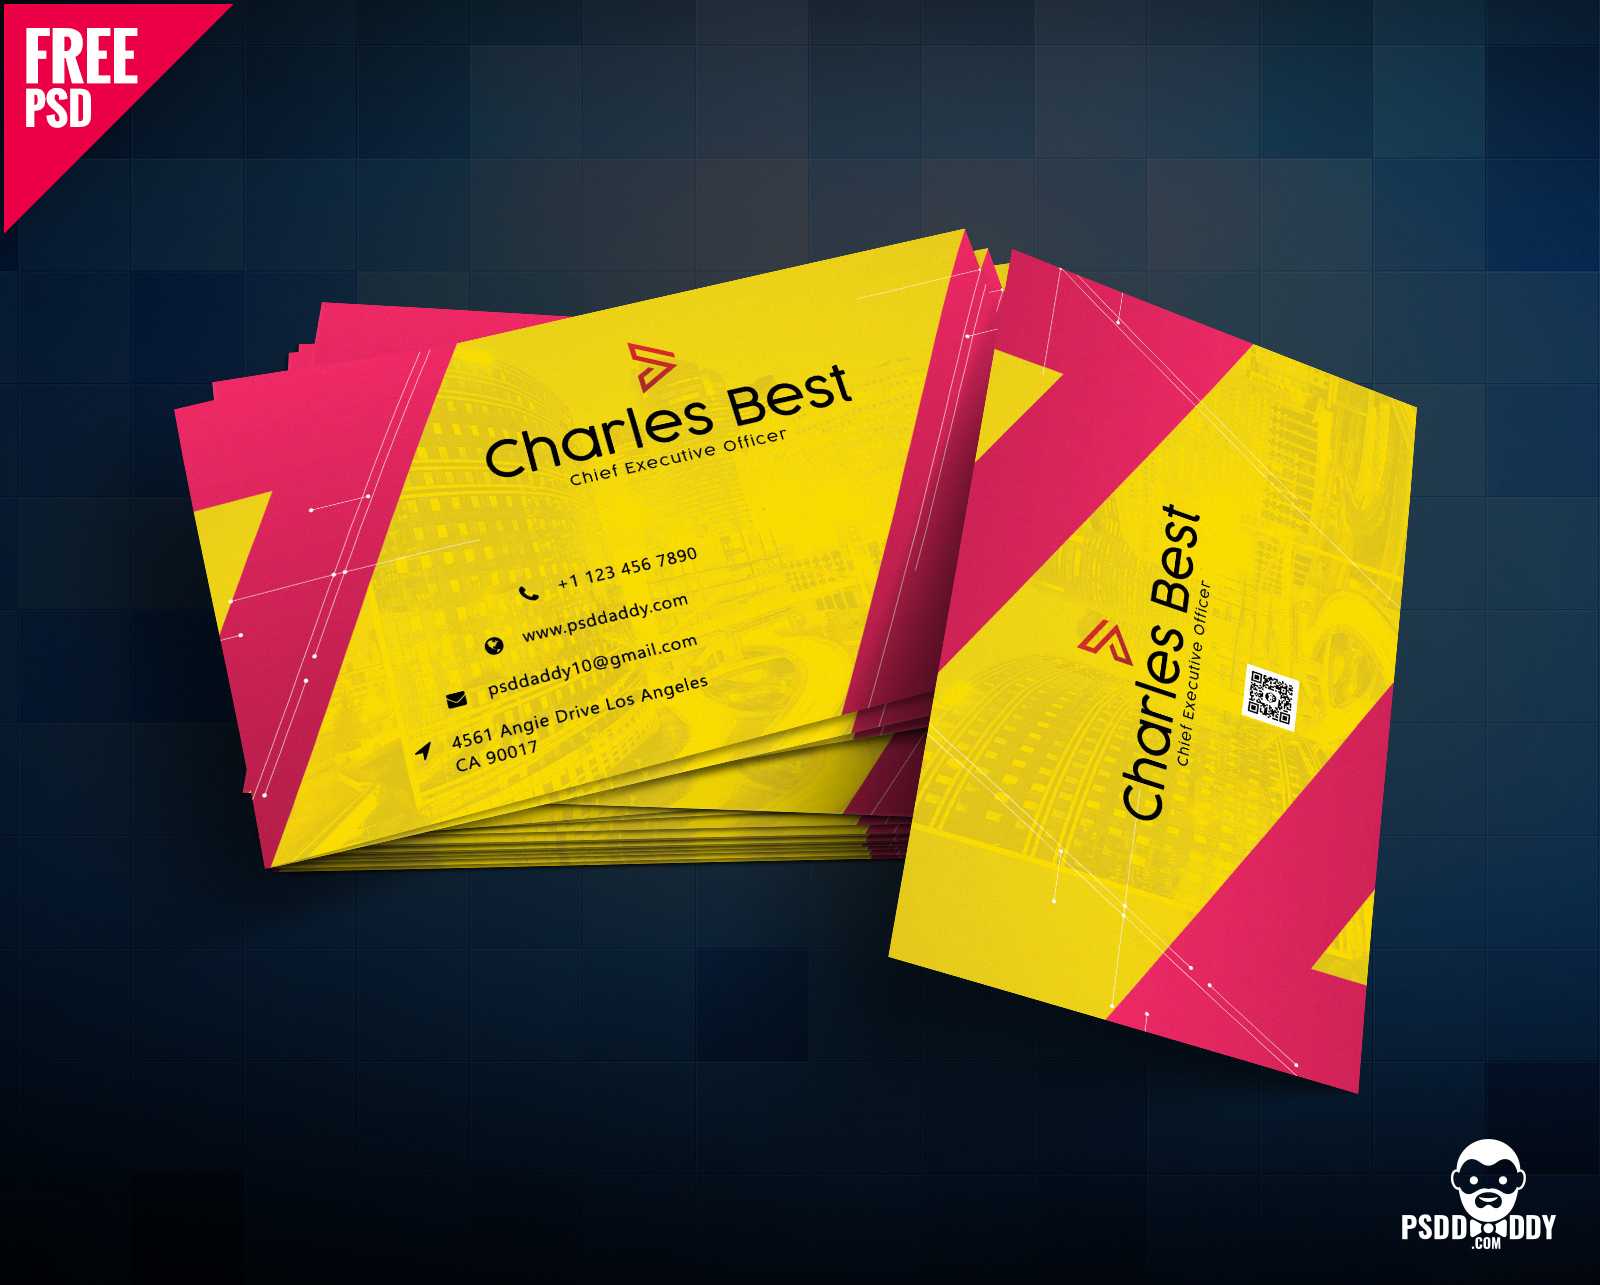 Download] Creative Business Card Free Psd | Psddaddy In Free Psd Visiting Card Templates Download